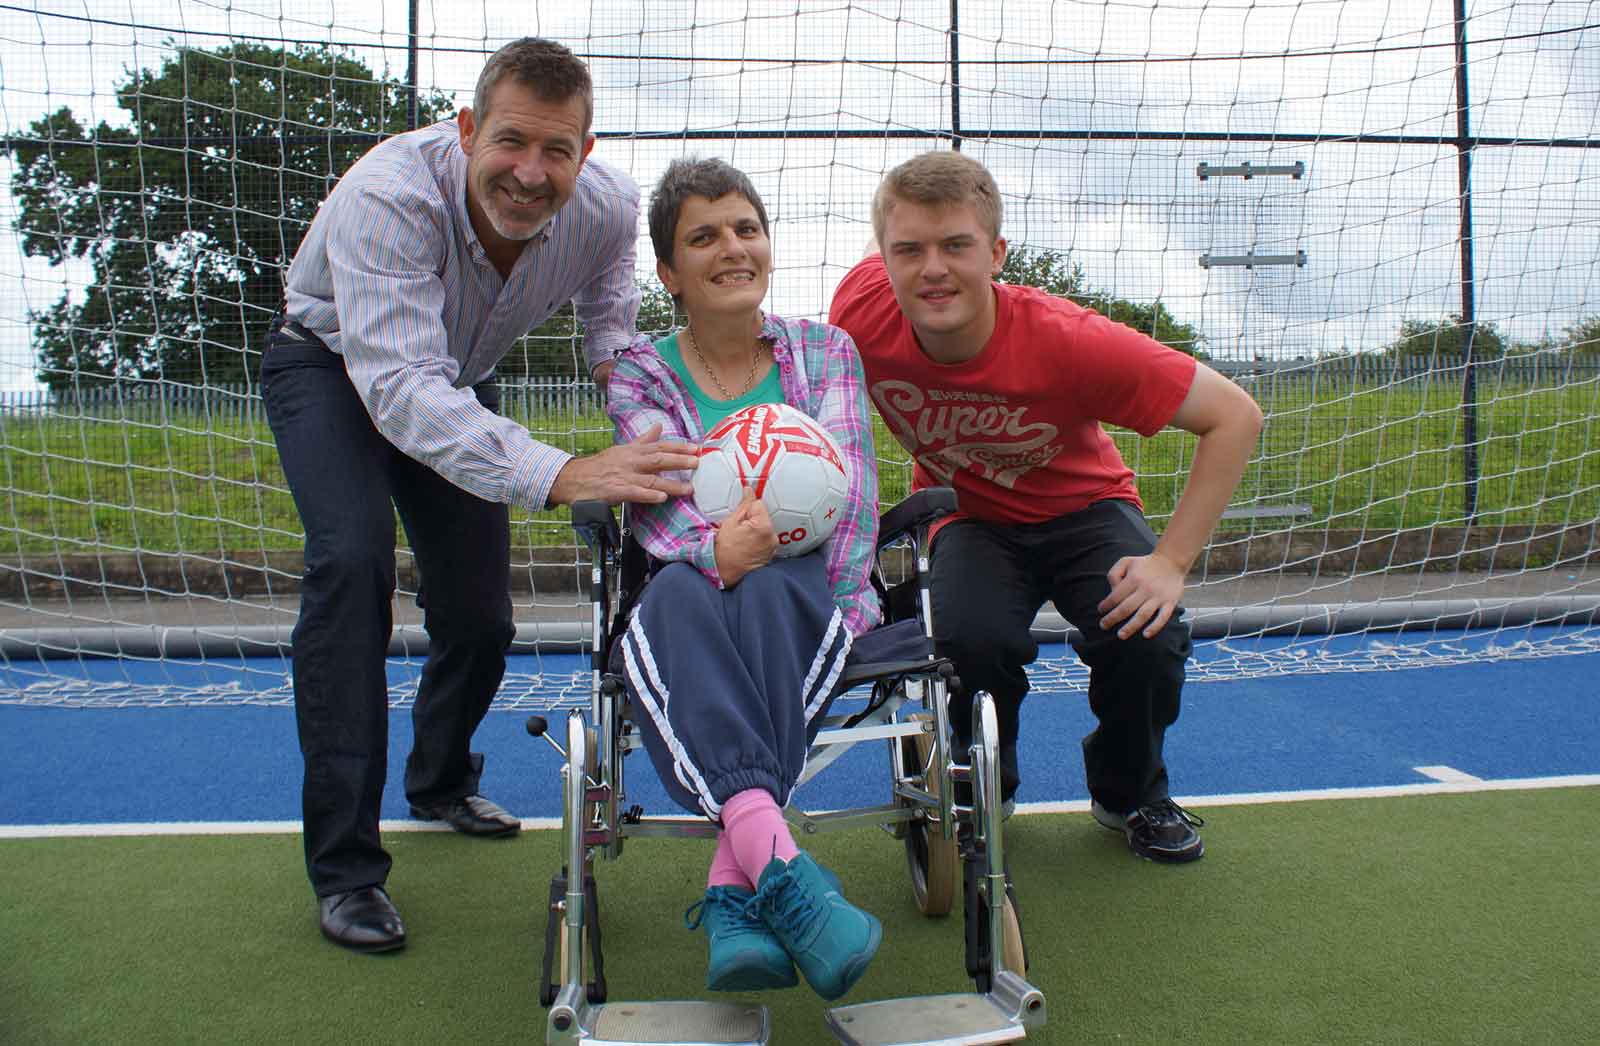 Positive Image! Former England, Leeds and Everton goalkeeper Nigel Martyn (left) with Disability Action Yorkshire Care Home customer Eliza Bennett and Disability Action Yorkshire employee James Parker, at the launch of the charity’s Own Goals buddying initiative